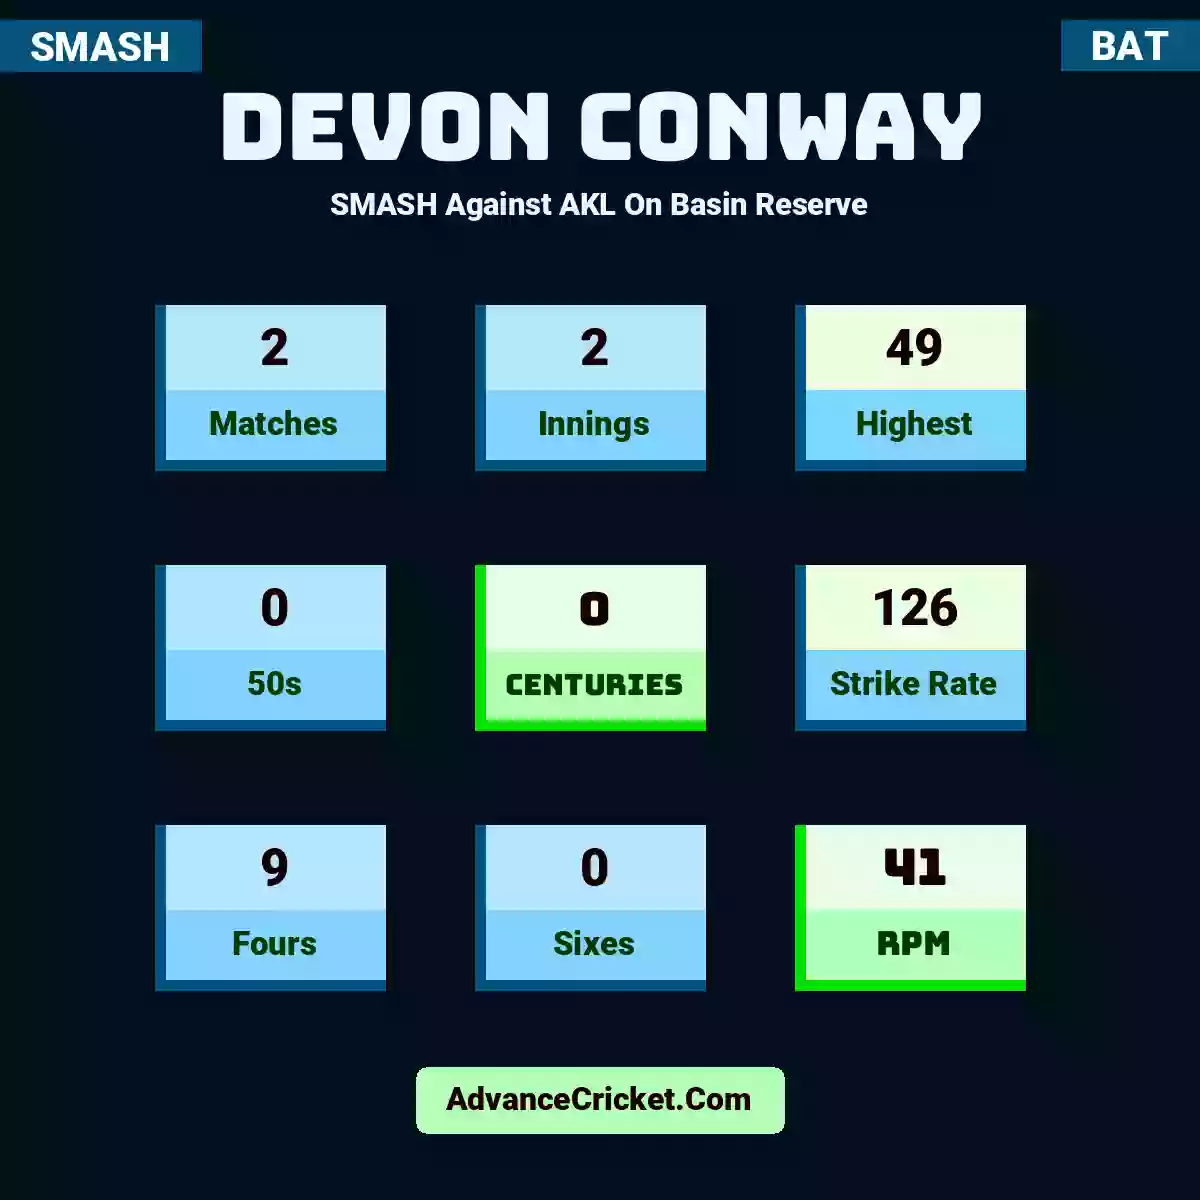 Devon Conway SMASH  Against AKL On Basin Reserve, Devon Conway played 2 matches, scored 49 runs as highest, 0 half-centuries, and 0 centuries, with a strike rate of 126. D.Conway hit 9 fours and 0 sixes, with an RPM of 41.